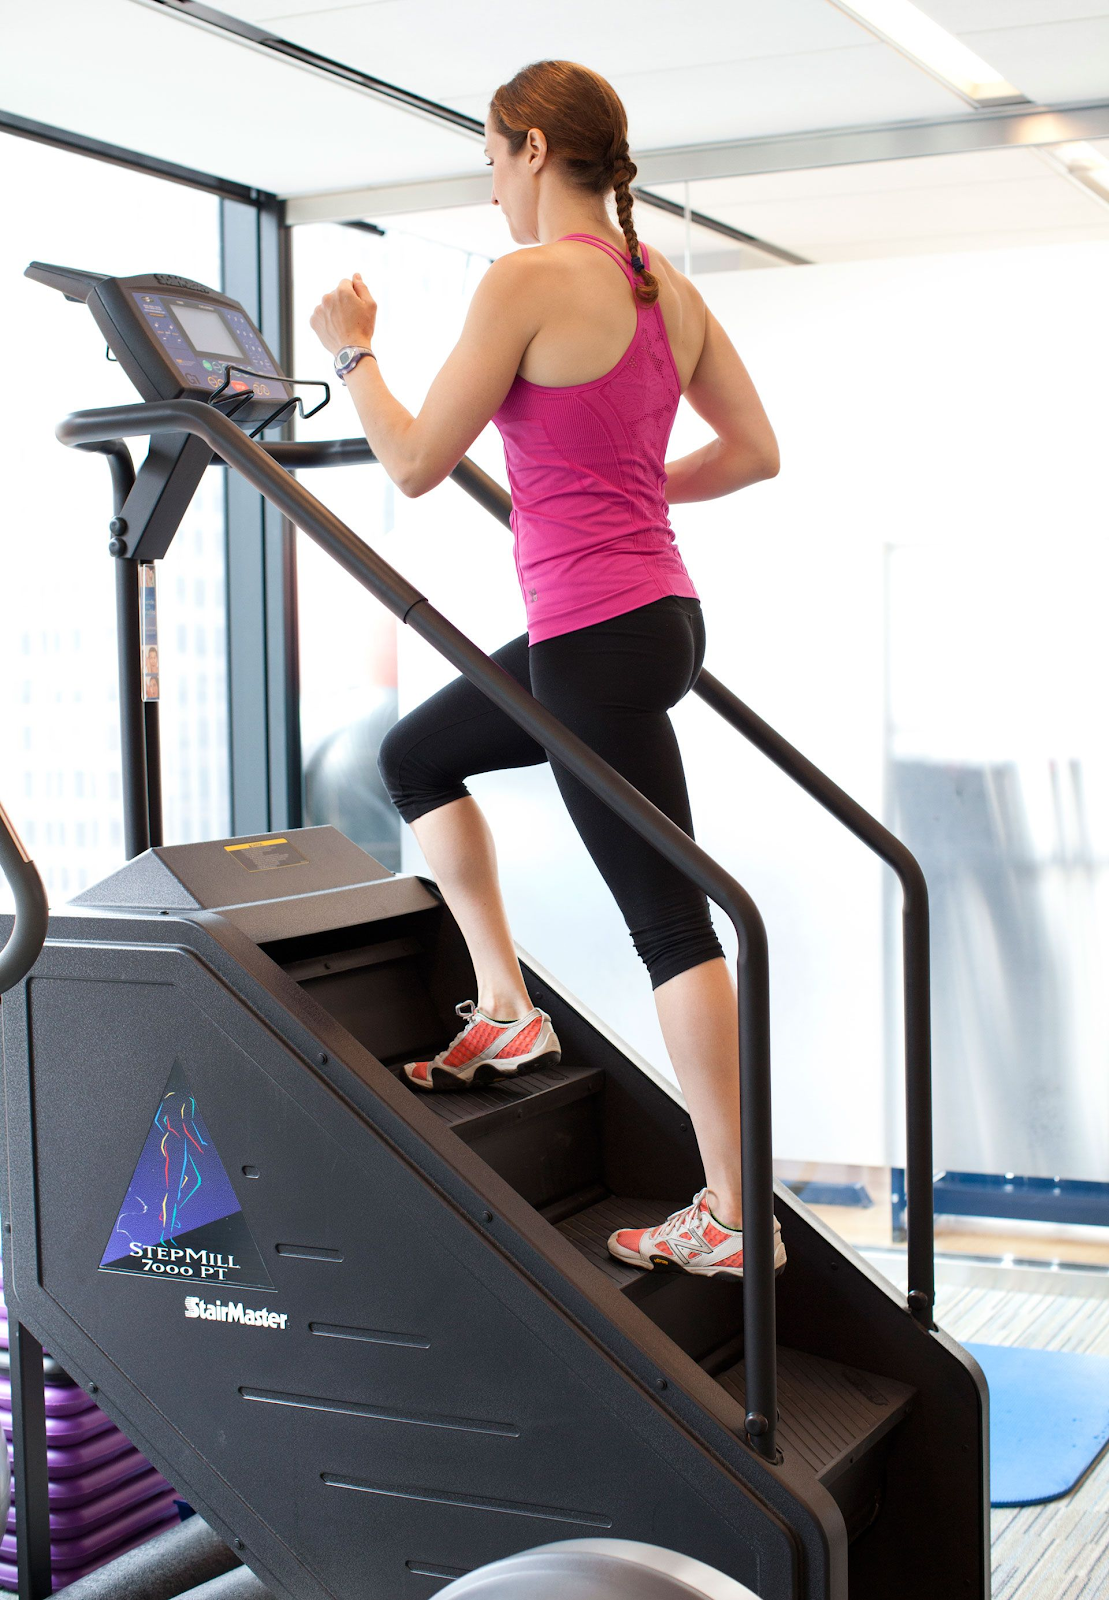 Benefits of Having a Stepmill Machine in Your Home Gym